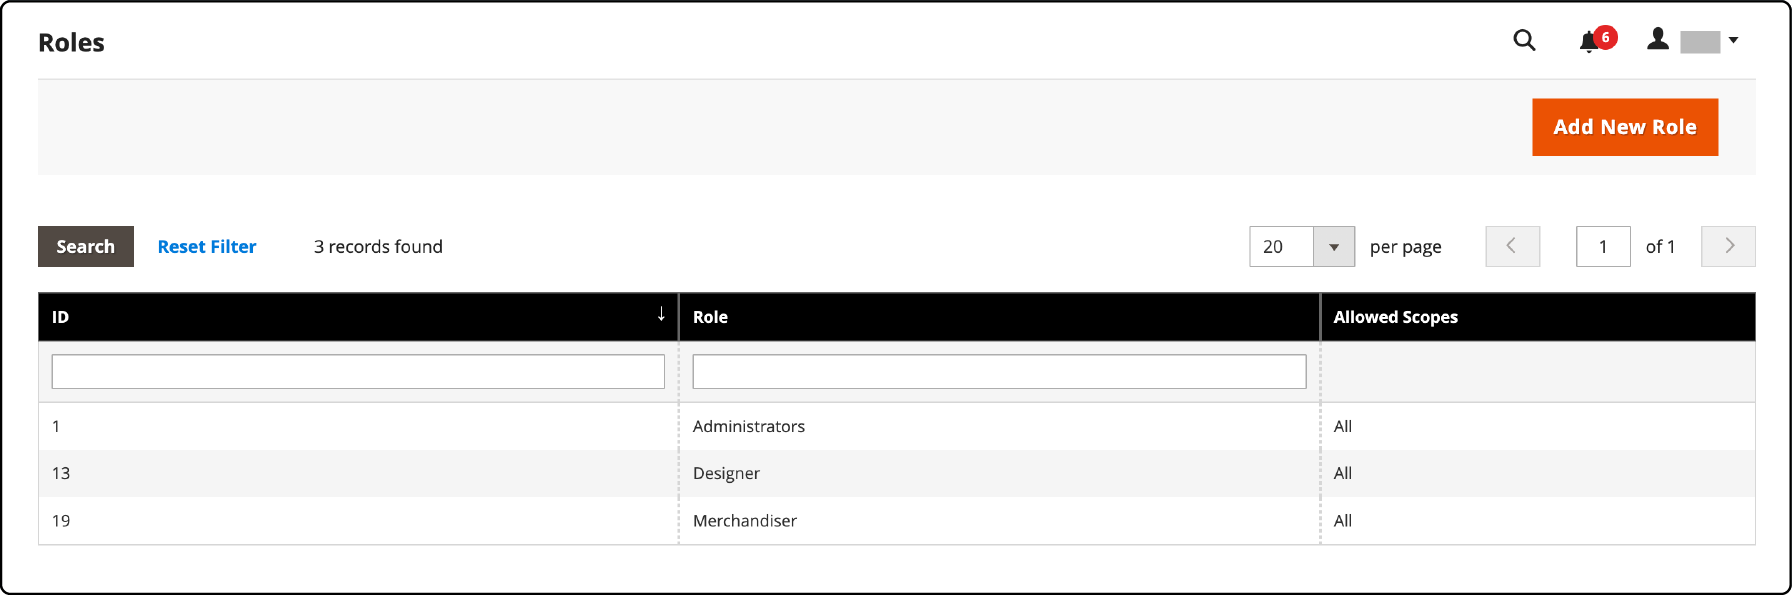 User roles and permissions functionality in Adobe Commerce B2B